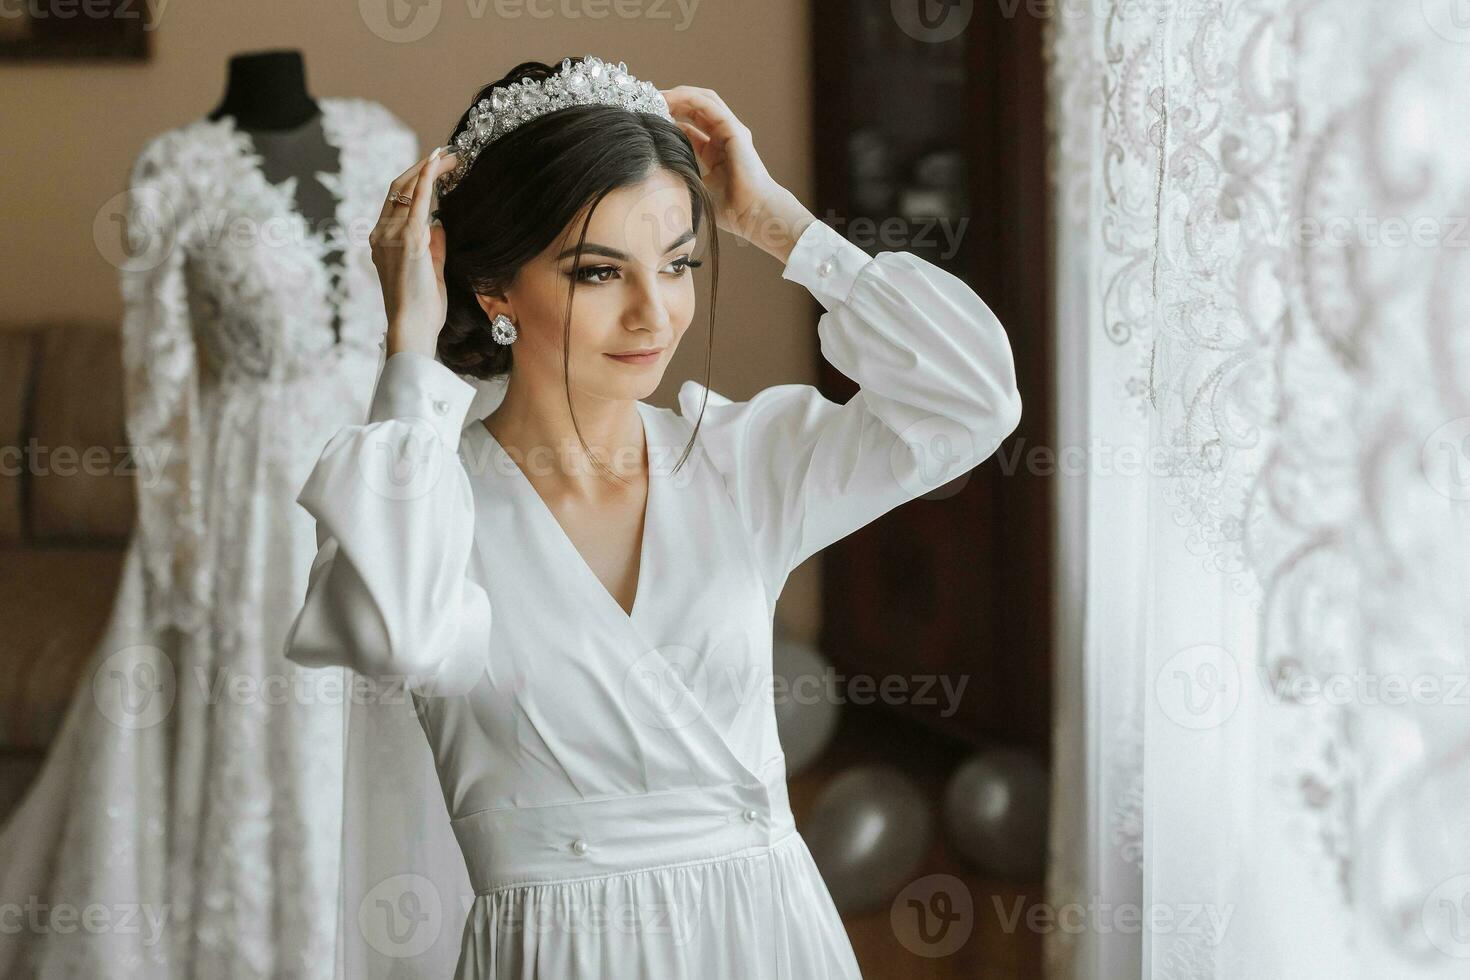 portrait of a beautiful girl in a robe with a crown on her head. Fashion, glamour, concepts. The morning of the bride, the bride in a robe stands near a mannequin with her wedding dress photo